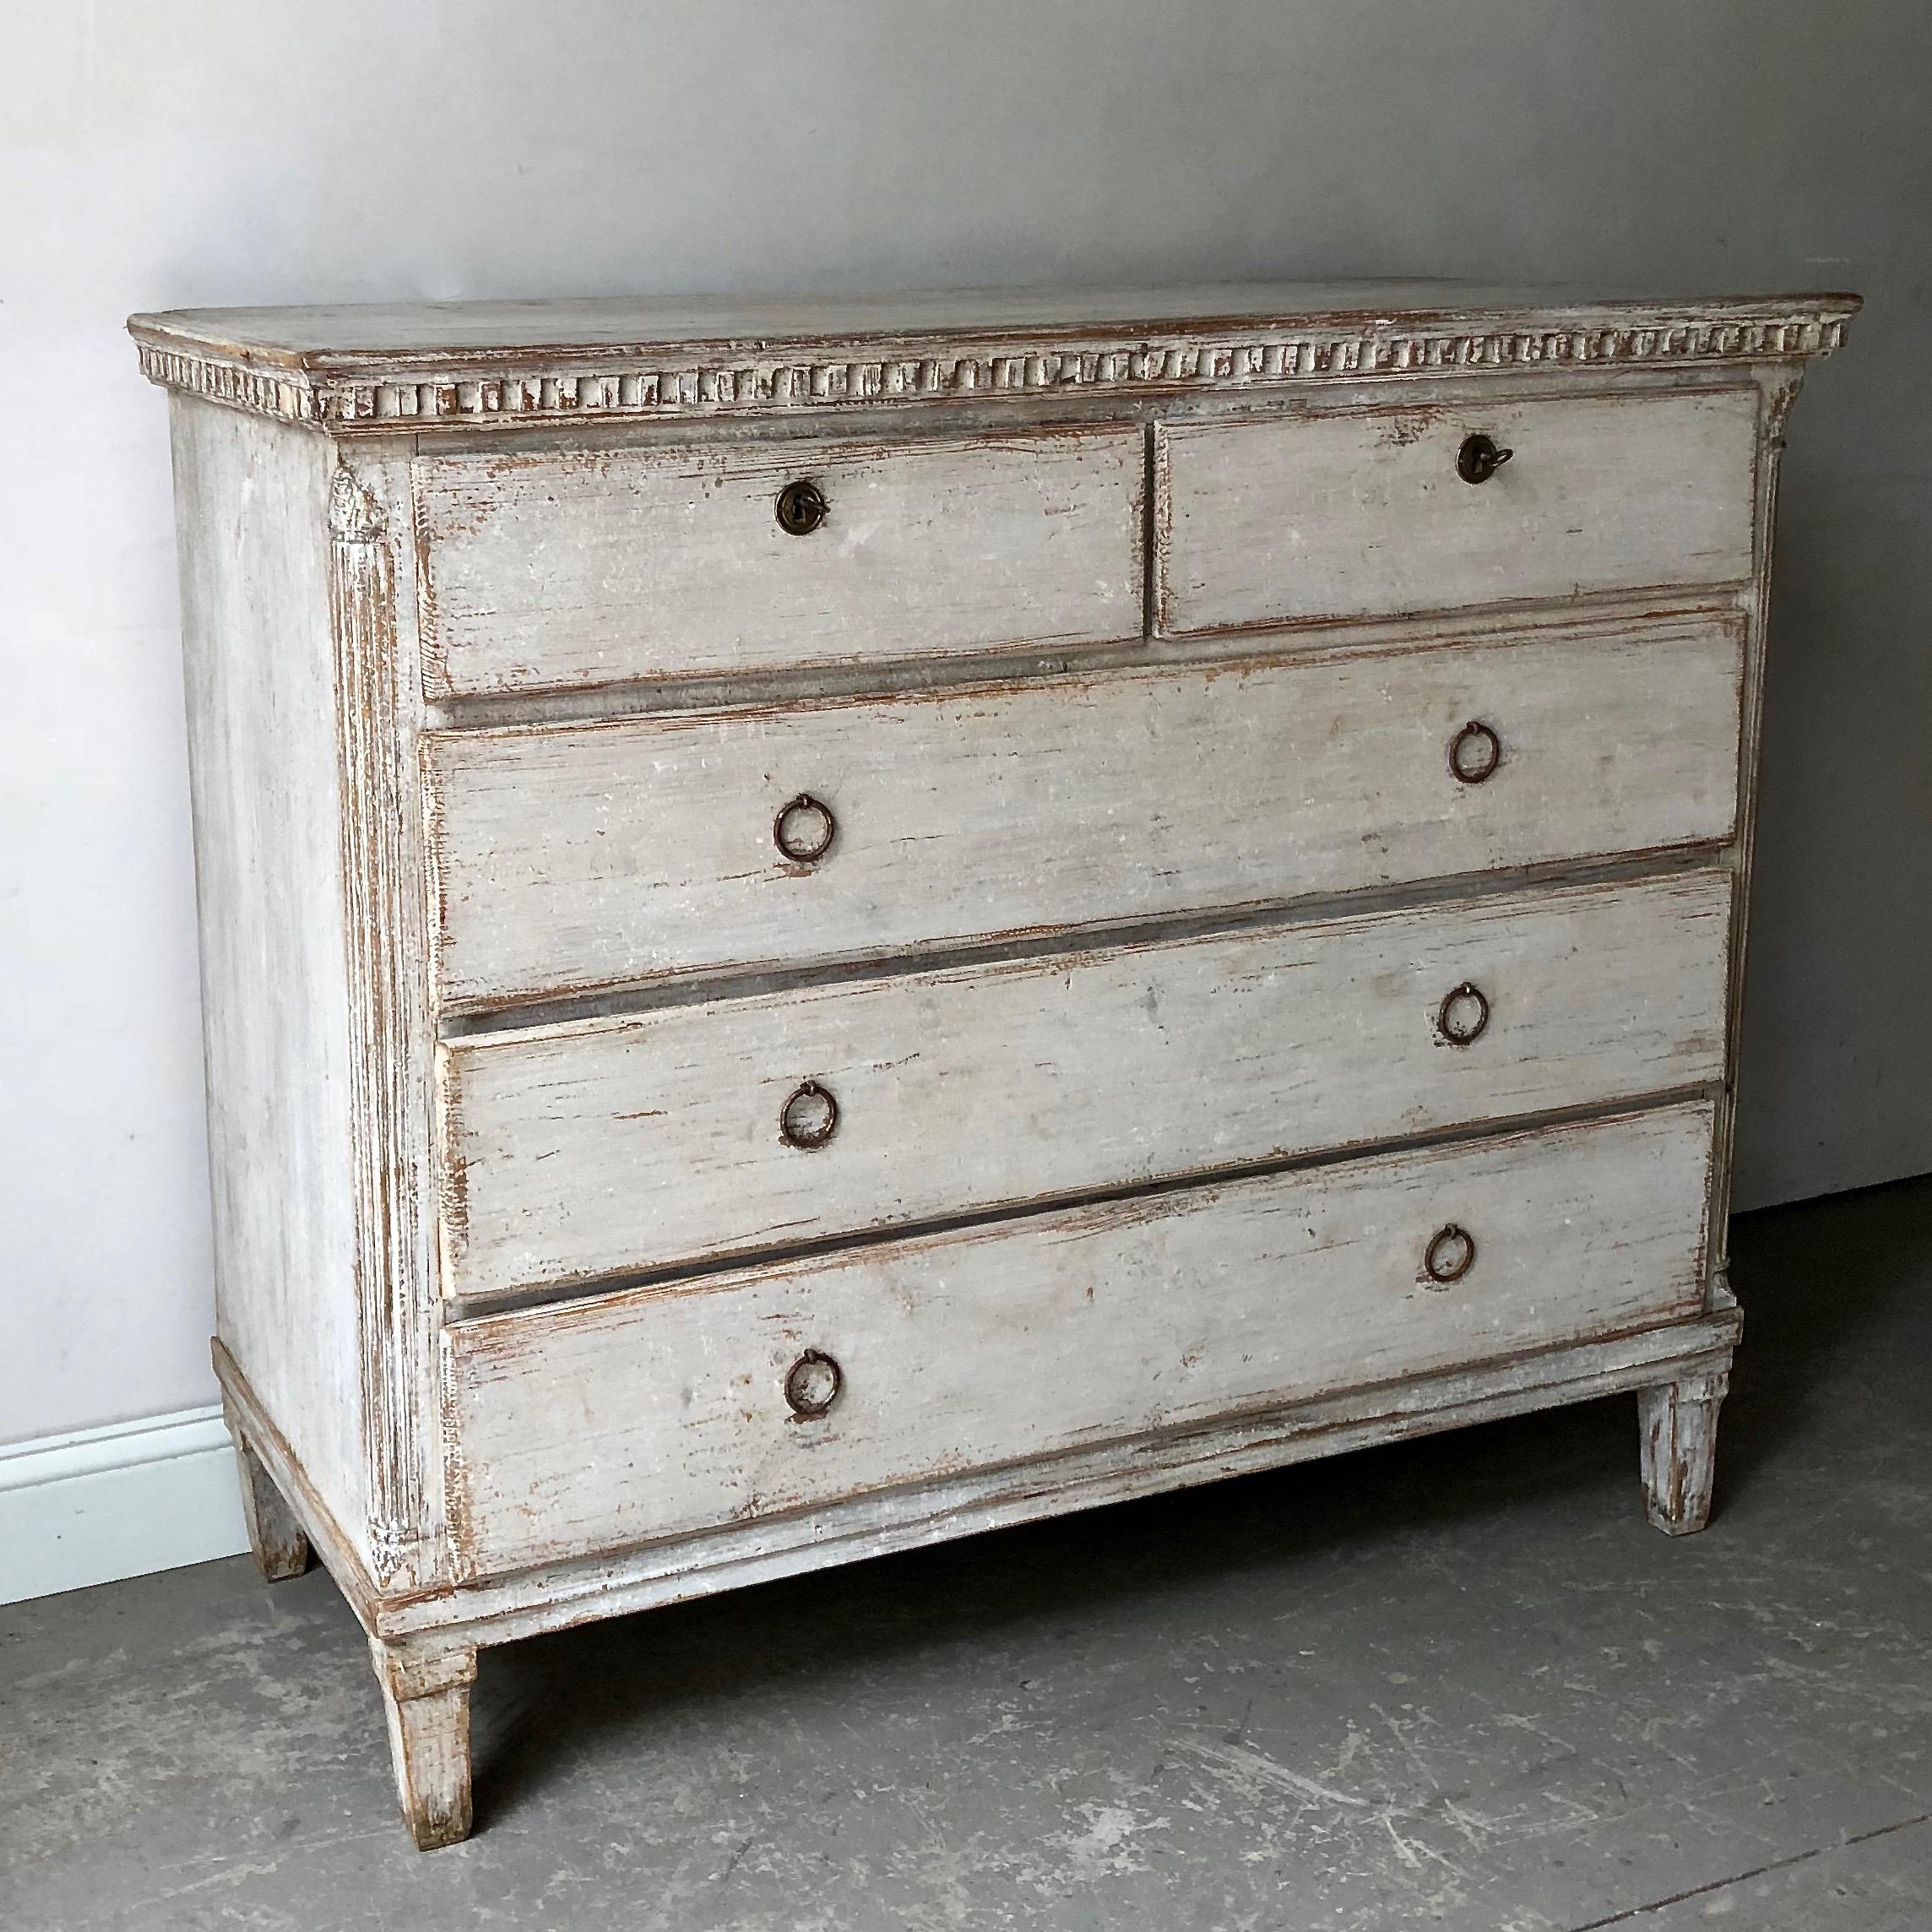 A handsome Swedish Gustavian period chest of drawers with original hardware and original wonderful worn patina. Stockholm, Sweden, 1820. 
Here are few examples, surprising pieces and objects, authentic, decorative and rare items that you will only